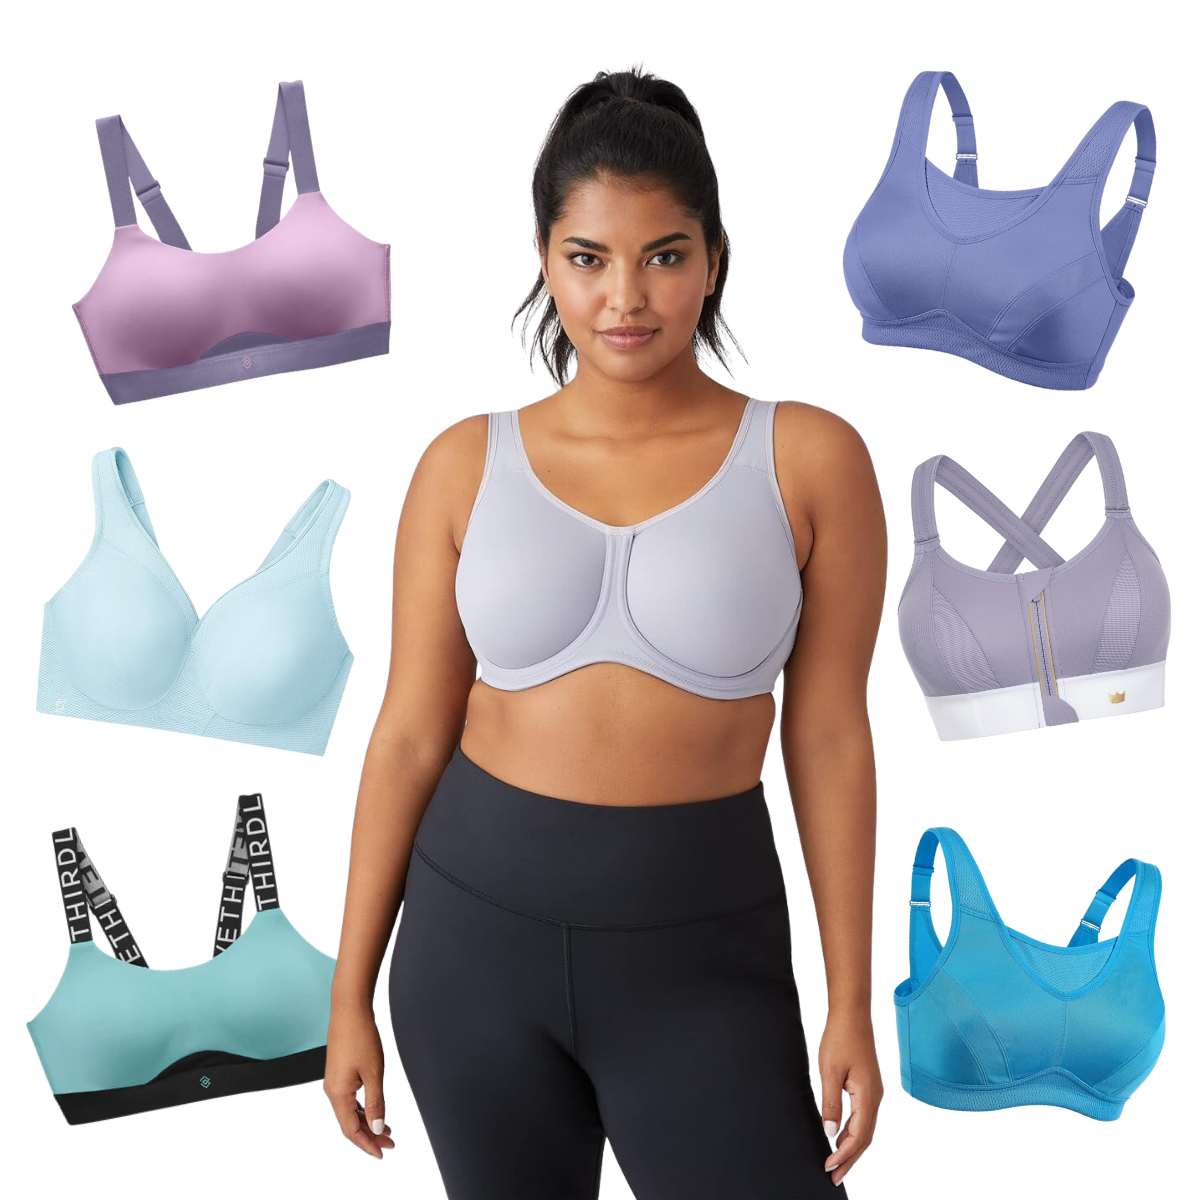 https://akns-images.eonline.com/eol_images/Entire_Site/202403/rs_1200x1200-240103144404-Best_Sports_Bras_For_Big_Boobs_Thumbnail.png?fit=around%7C1200:1200&output-quality=90&crop=1200:1200;center,top